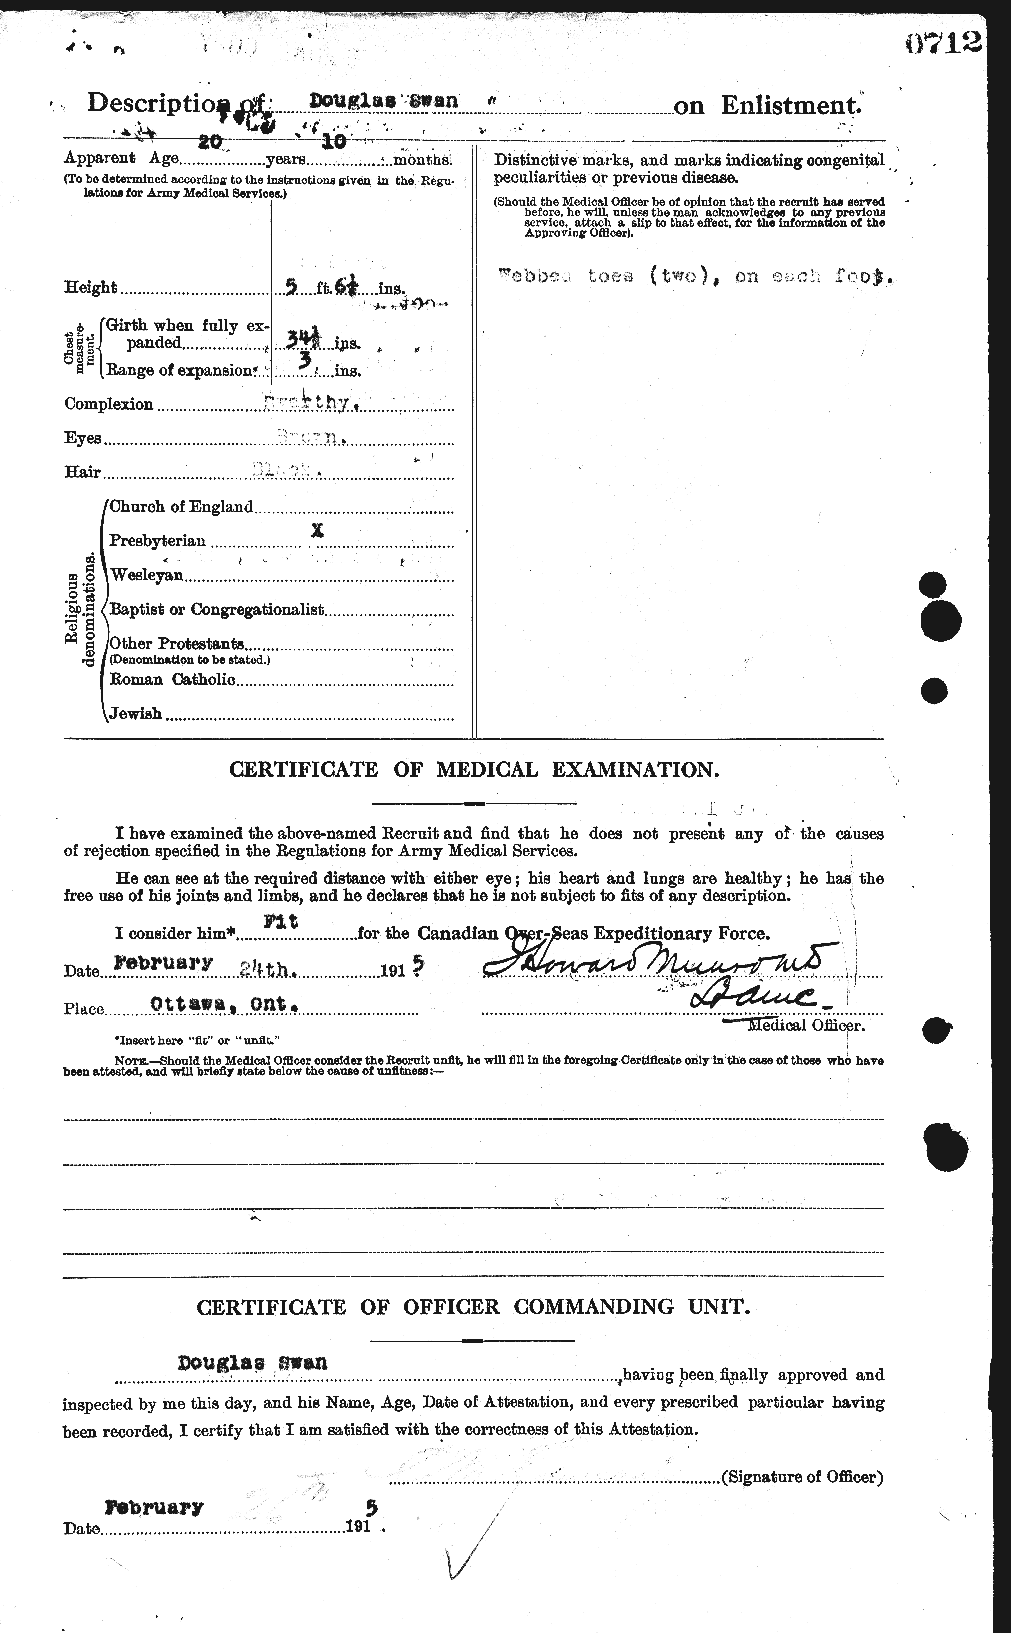 Personnel Records of the First World War - CEF 127374b